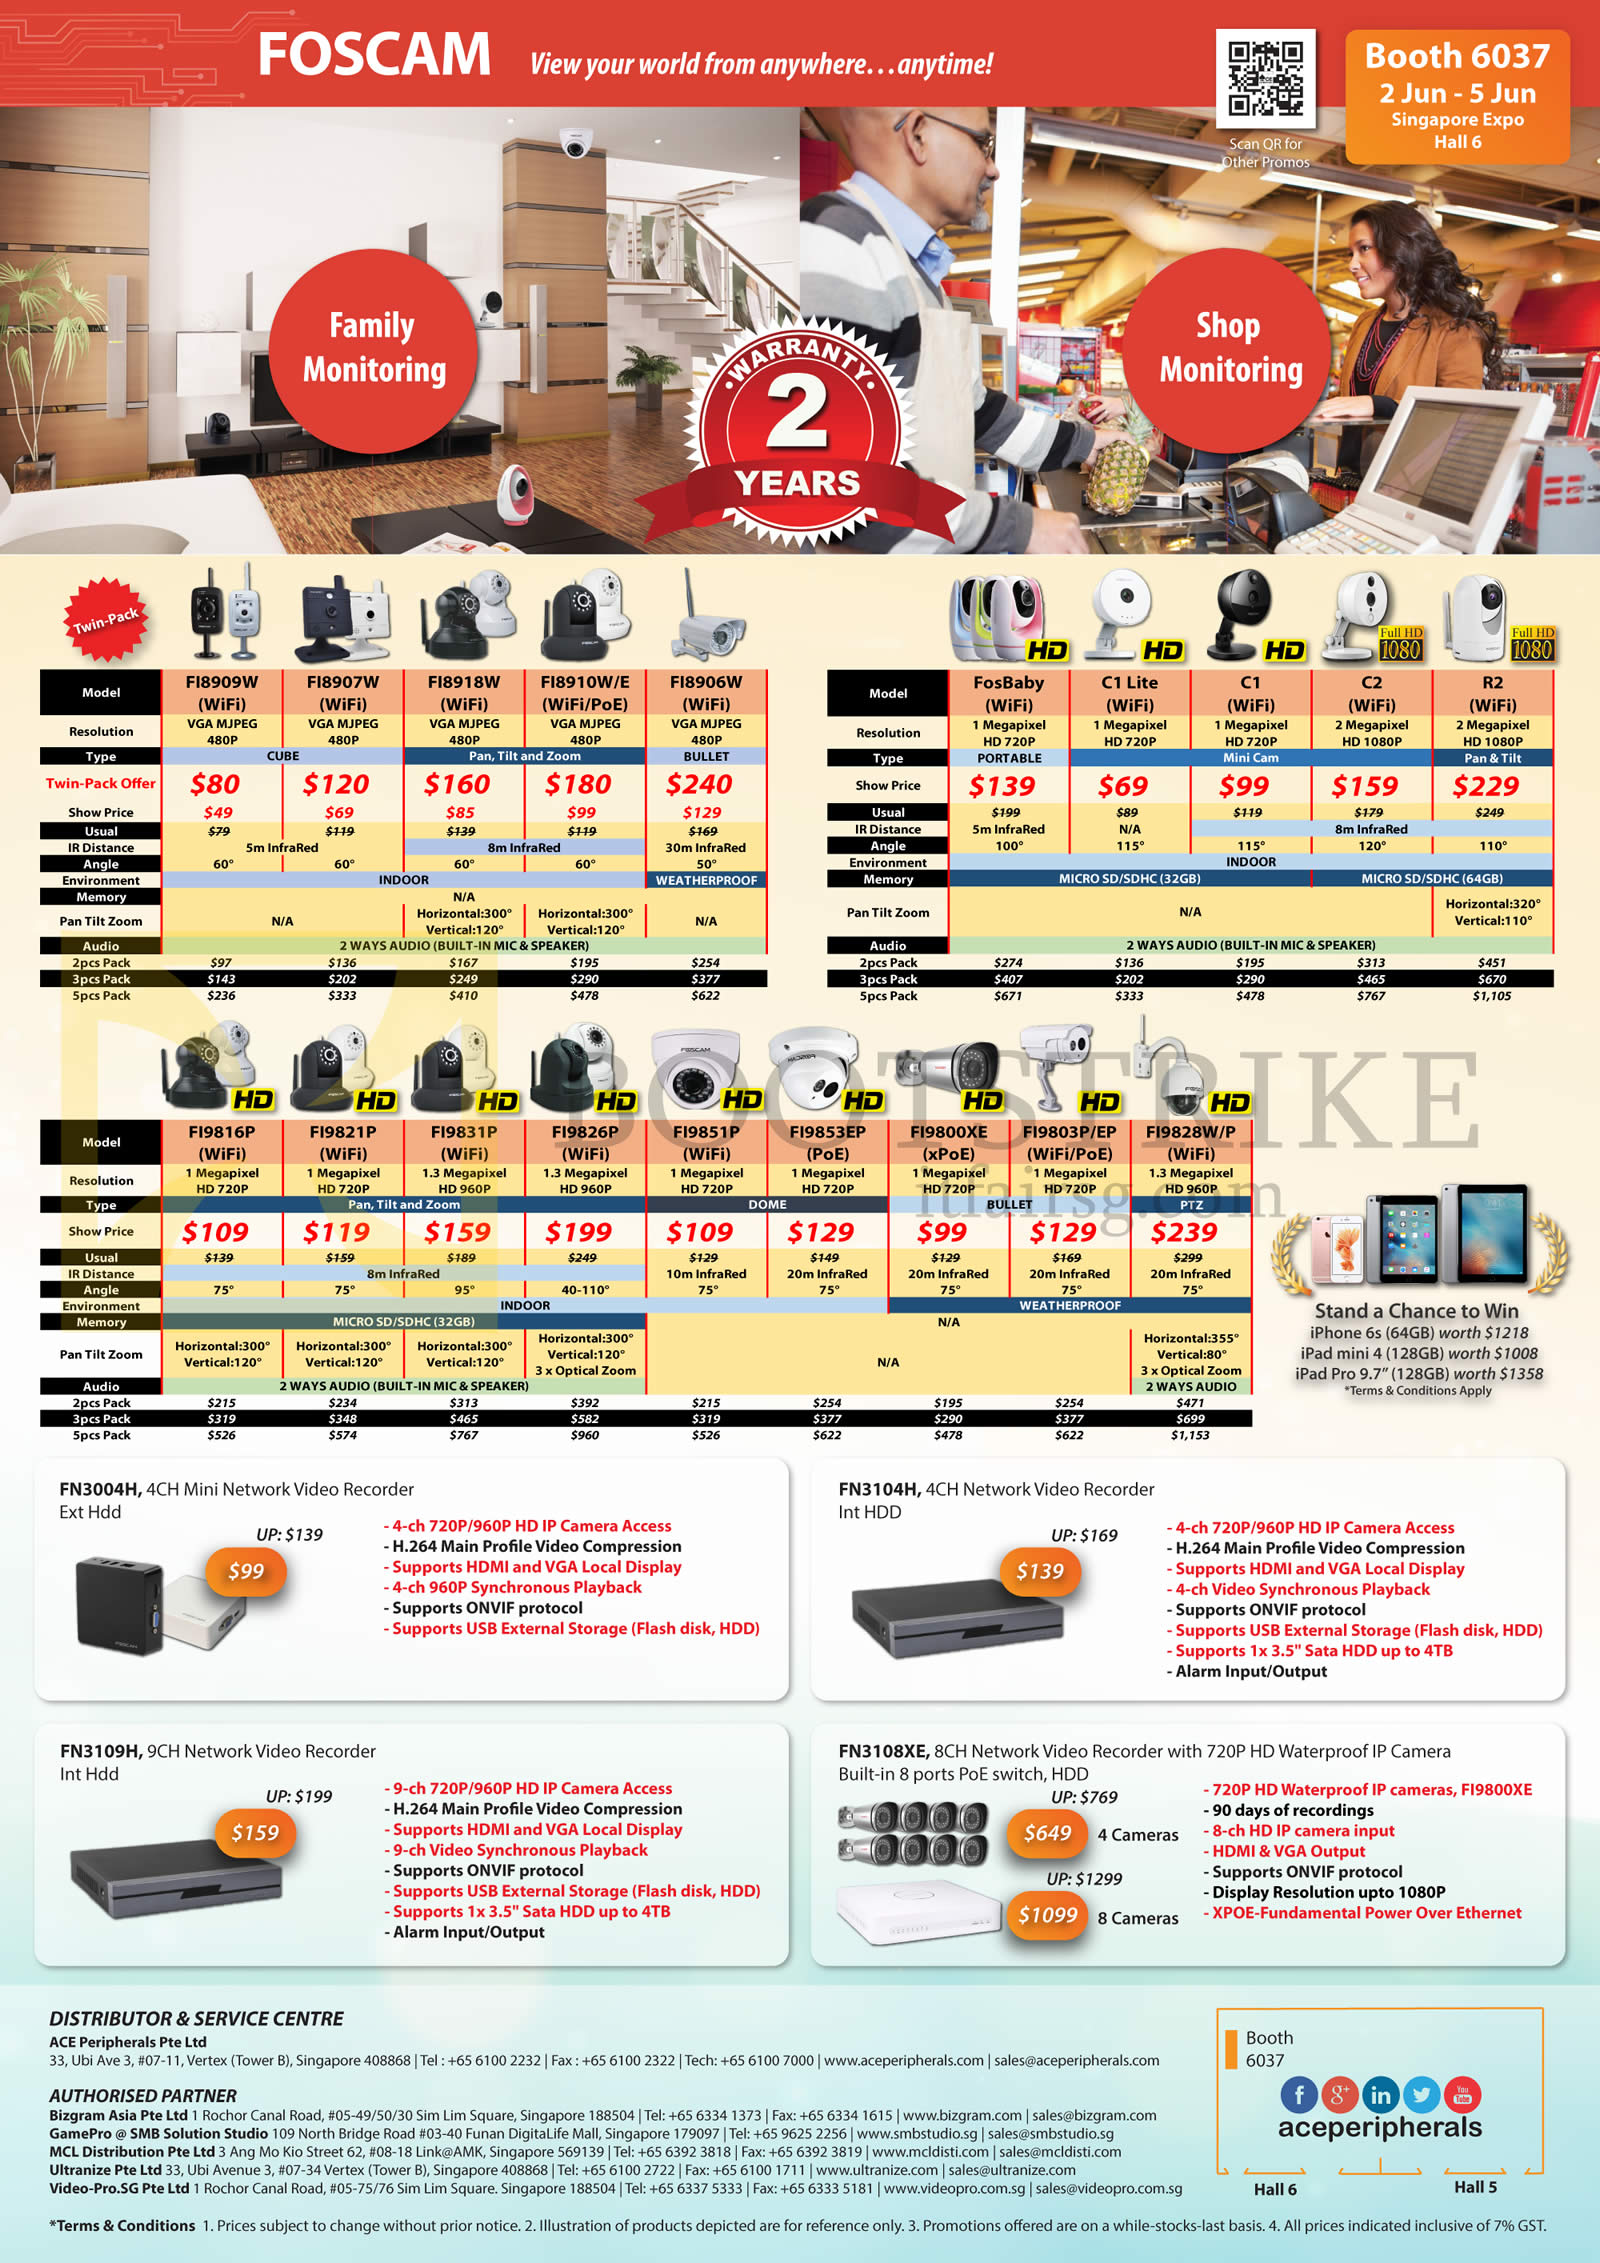 PC SHOW 2016 price list image brochure of ACE Peripherals Foscam Stand Alone Network IP POE WiFi Camera FI8909W, FI8907W, FI8918W, FI8910W, FI8906W, FI9816P, FI9821P, FI9831P, FI9826P, FI9851P